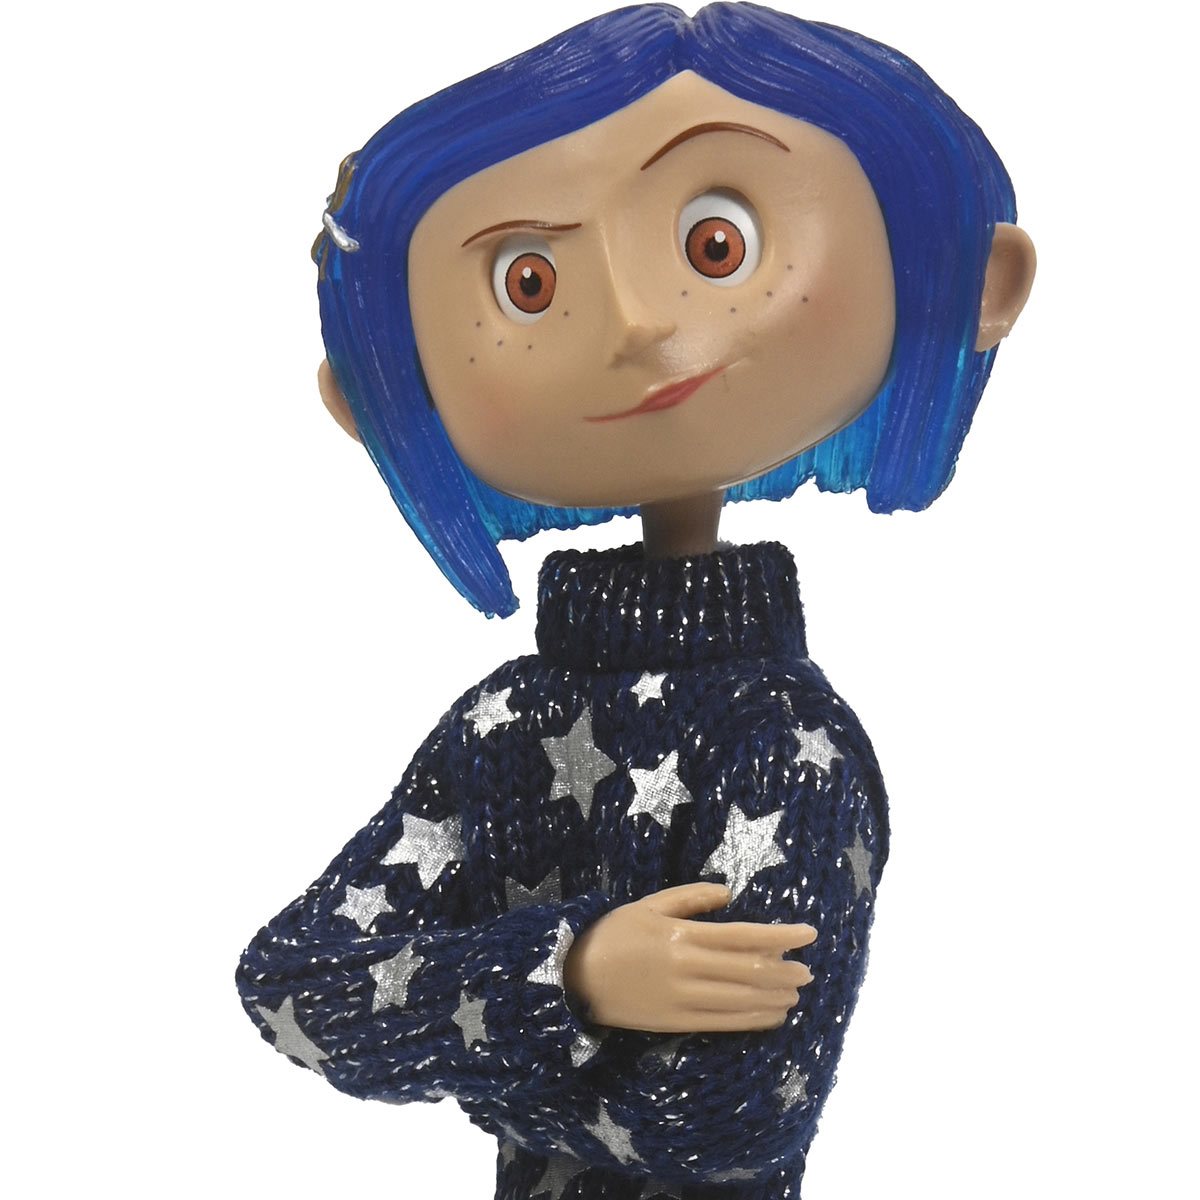 Coraline in Star Sweater Action Figure - Entertainment Earth